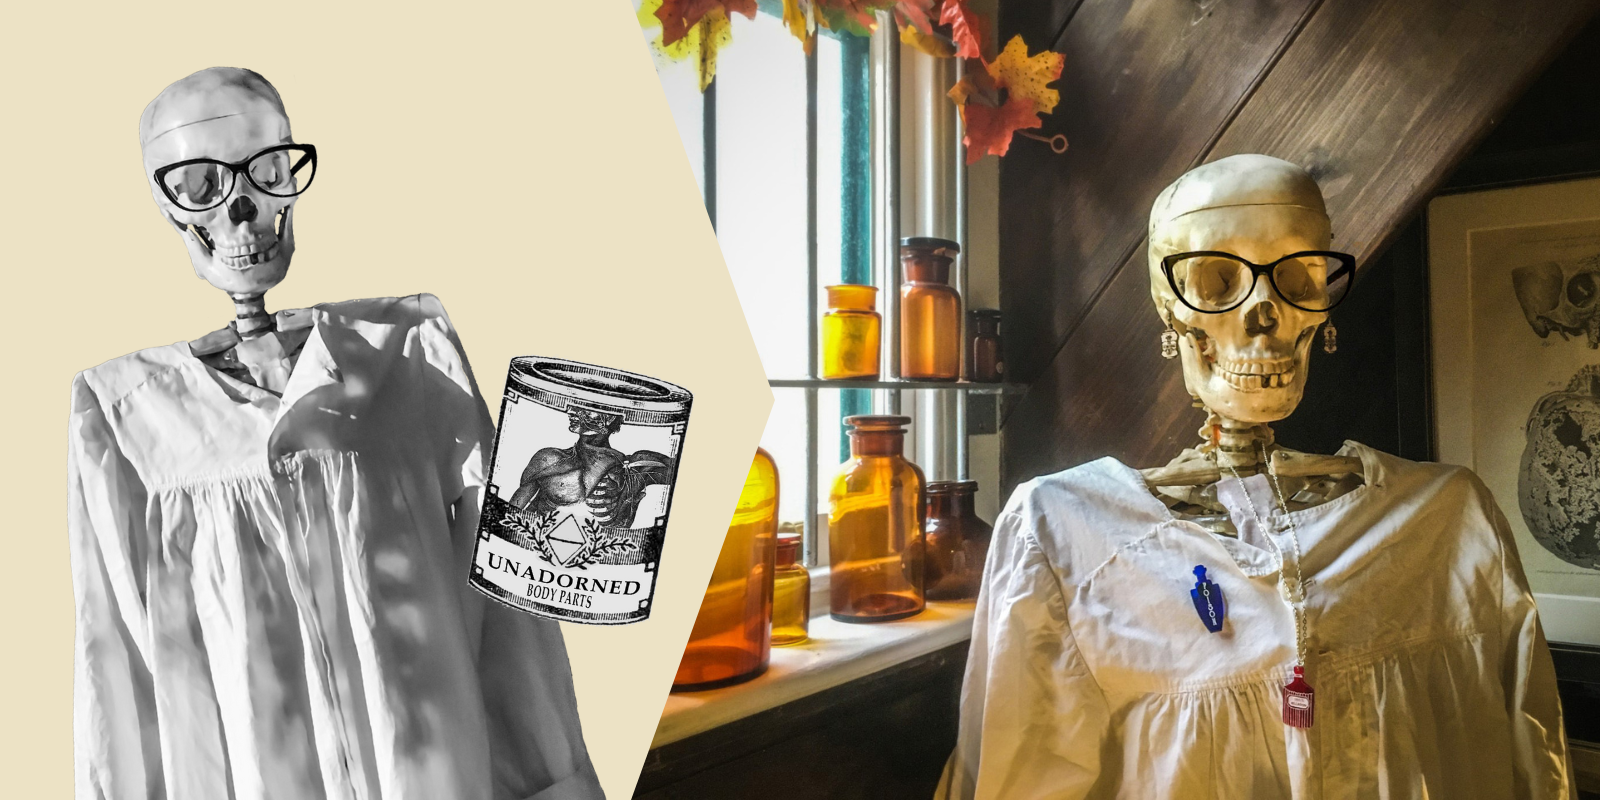 Left: a cut-out black and white photo of a skeleton wearing glasses and a white gown, next to an illustrated tin labelled Unadorned Body Parts; Right: a colour photo of a skeleton wearing glasses, wooden earrings, a blue poison bottle brooch and a red apothecary bottle necklace, standing next to amber glass bottles on a window sill.